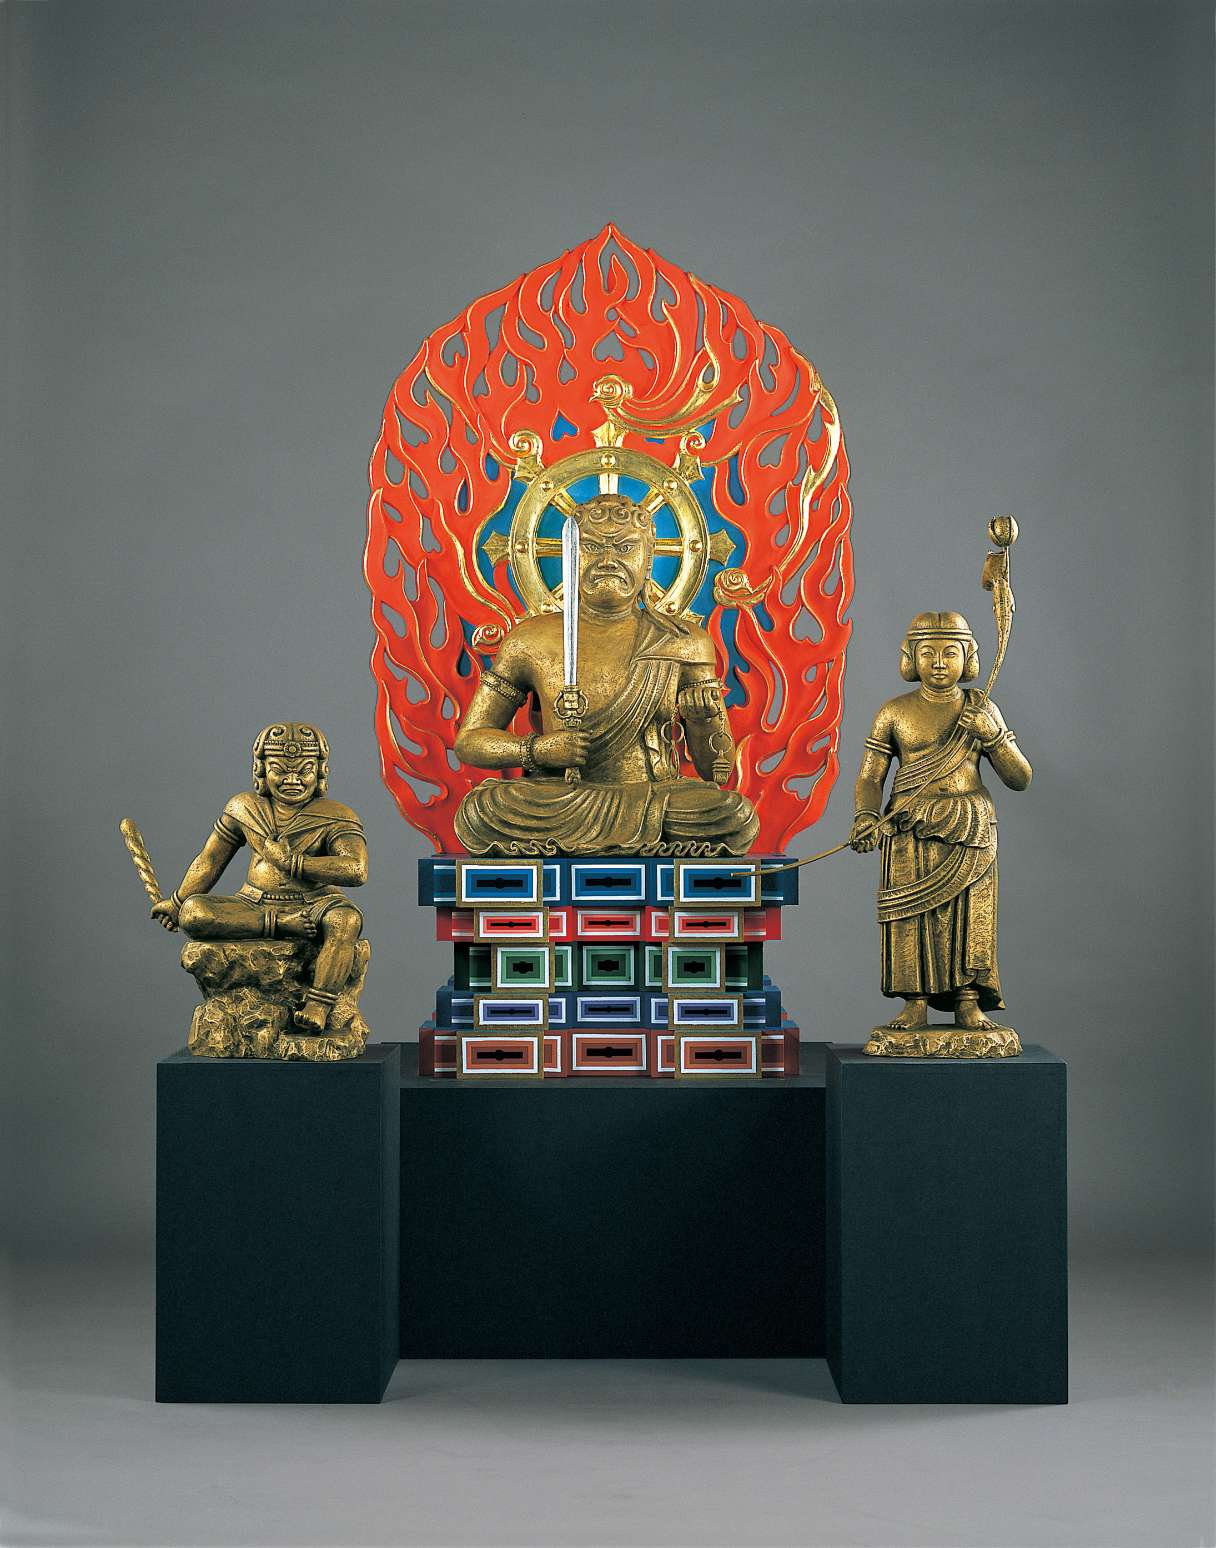 A statue of a scowling figure sitting atop a tall, variegated throne, holding an upturned sword in his right hand and noose in his left, backed by a golden wheel and a brilliant red halo of flame.